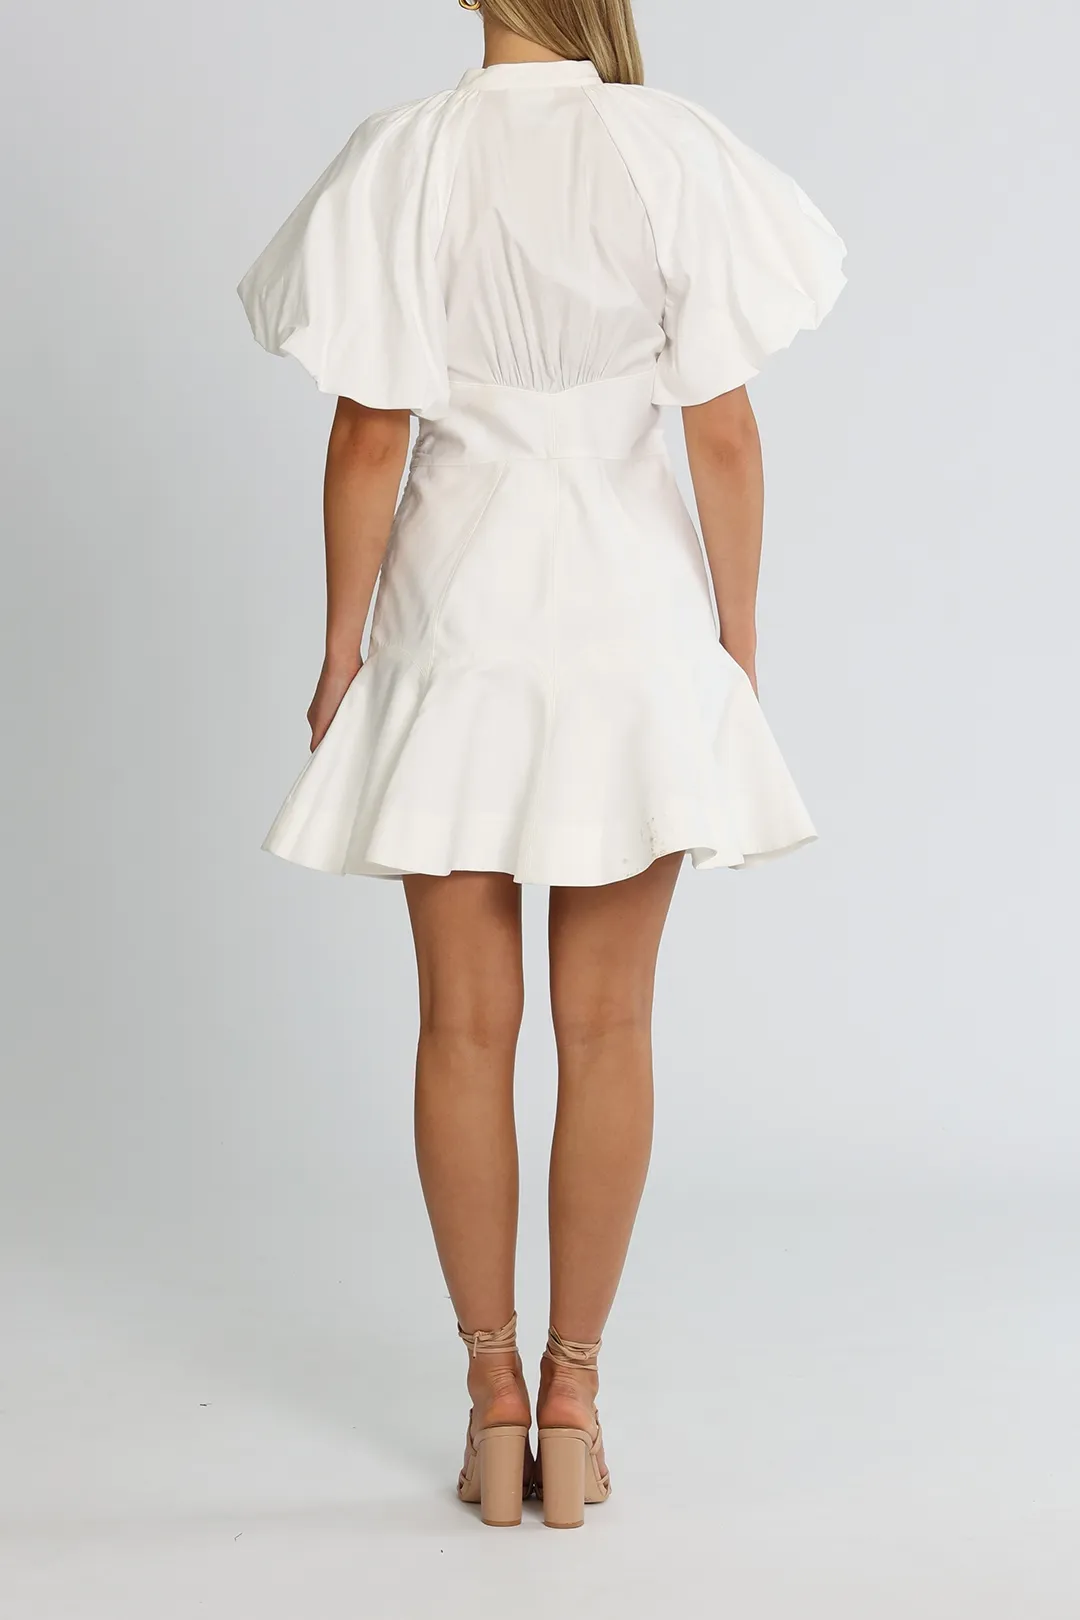 Dalbury Dress in white for summer party rentals.